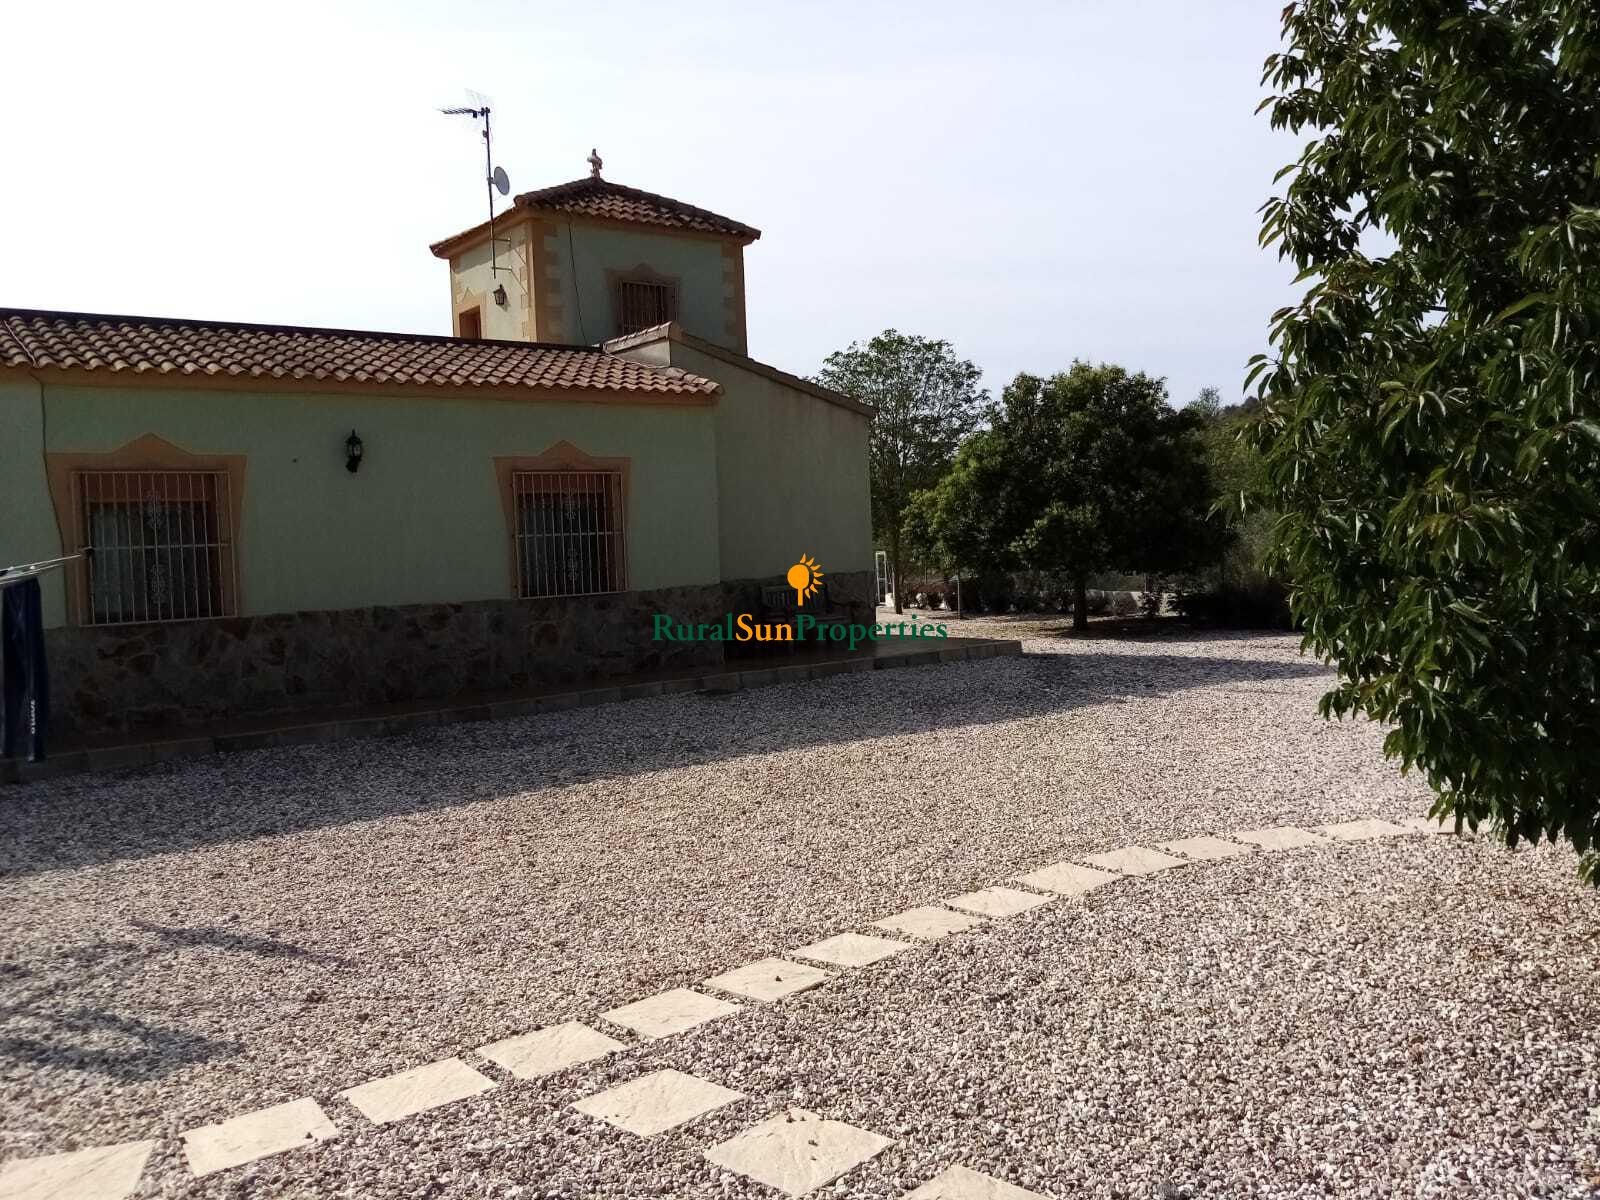 Nice country house for sale in Cehegin set on a plot of 8,000 sq.m